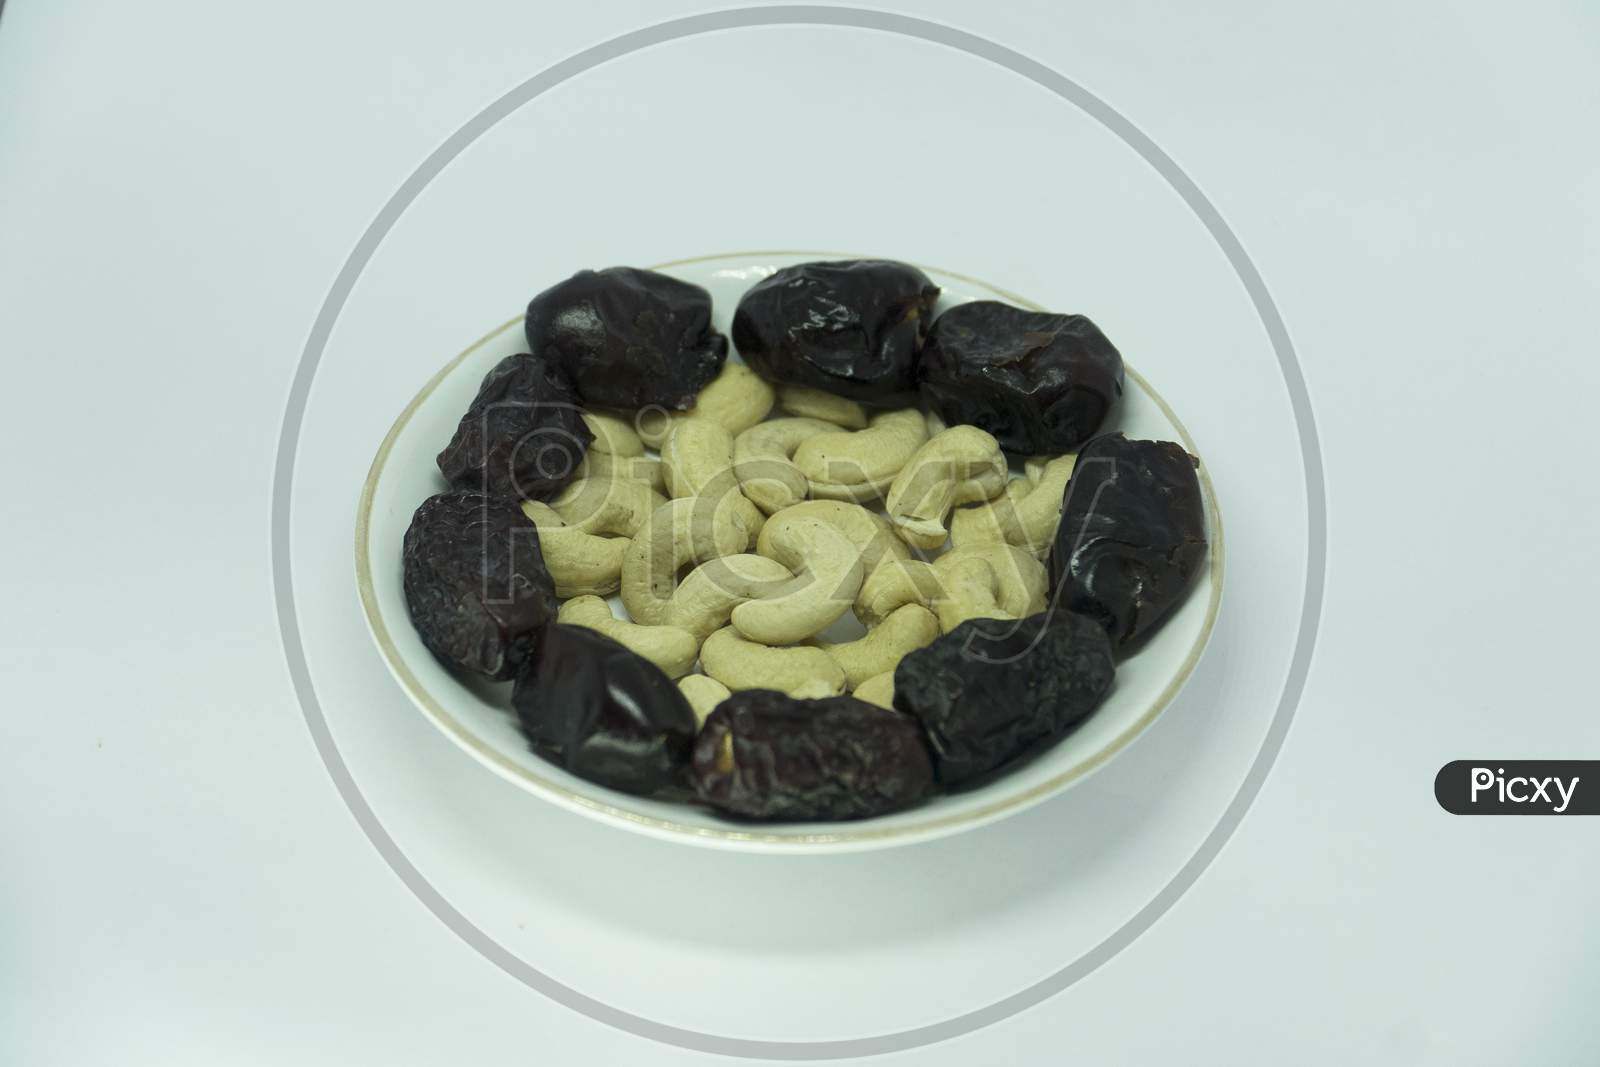 Image Of Healthy Dates And Cashew Nuts On White Ceramic Plate.